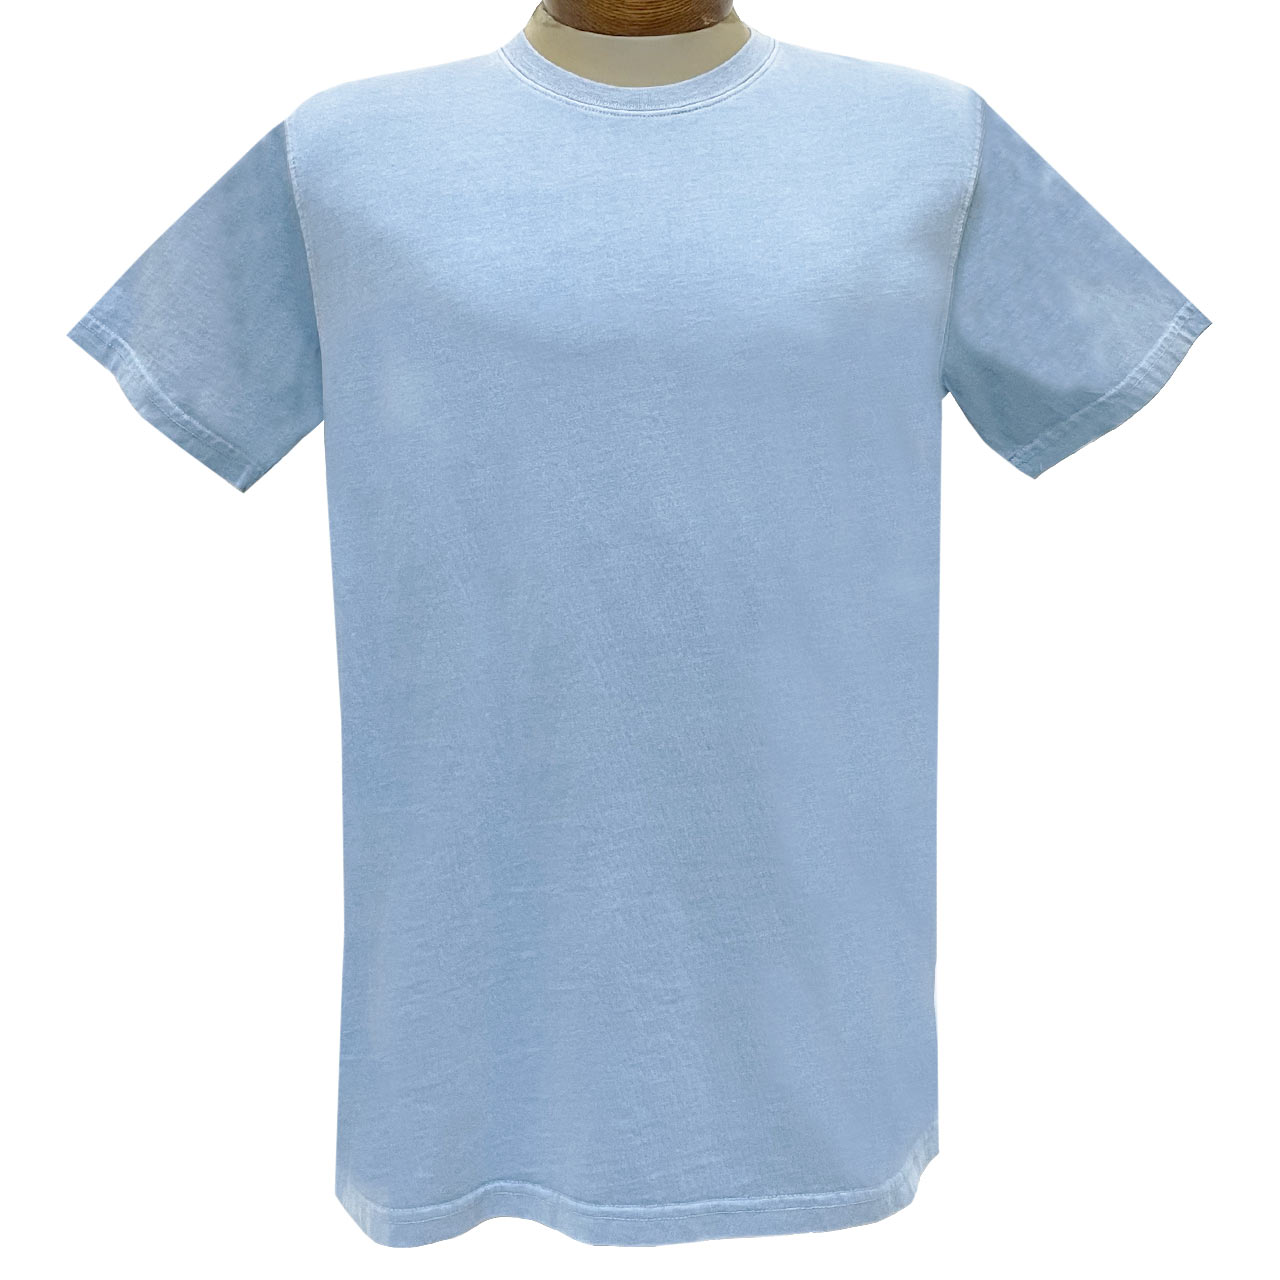 Men's R. Options by Basic Options Short Sleeve Pigment Dyed Tee, New Metal